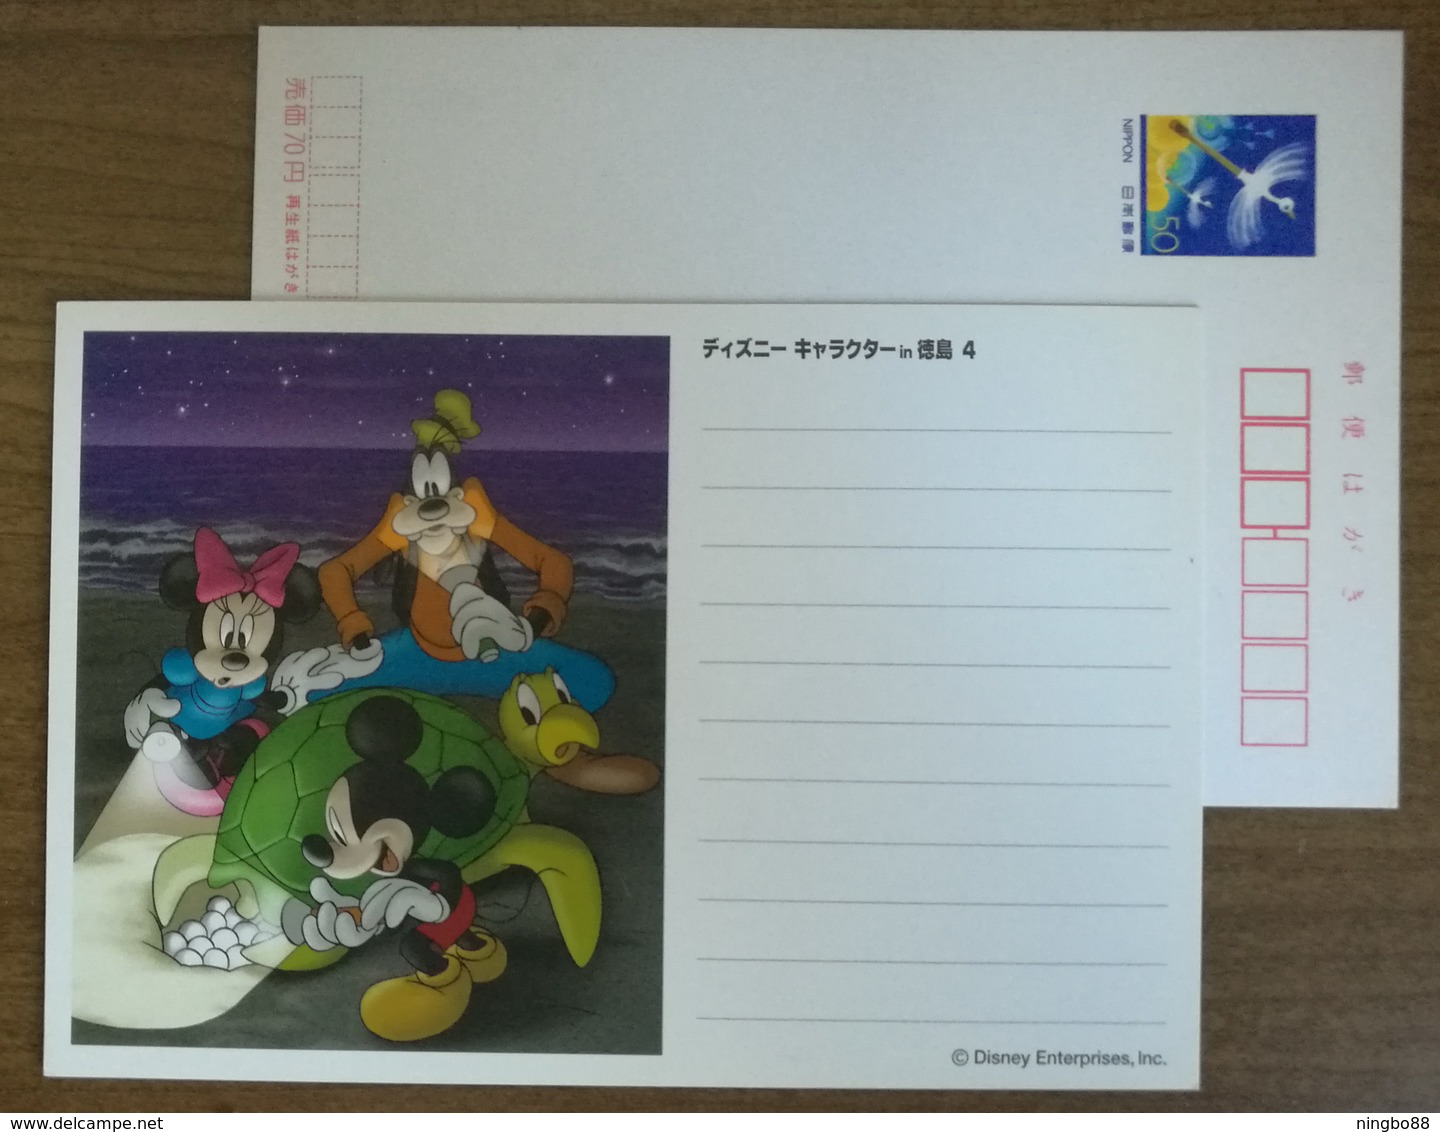 Japan Disney Charcters In Tokushima Postal Stationery Card No.4,Mickey Mouse,Minnie Mouse,Goofy Dog,Sea Turtle - Disney